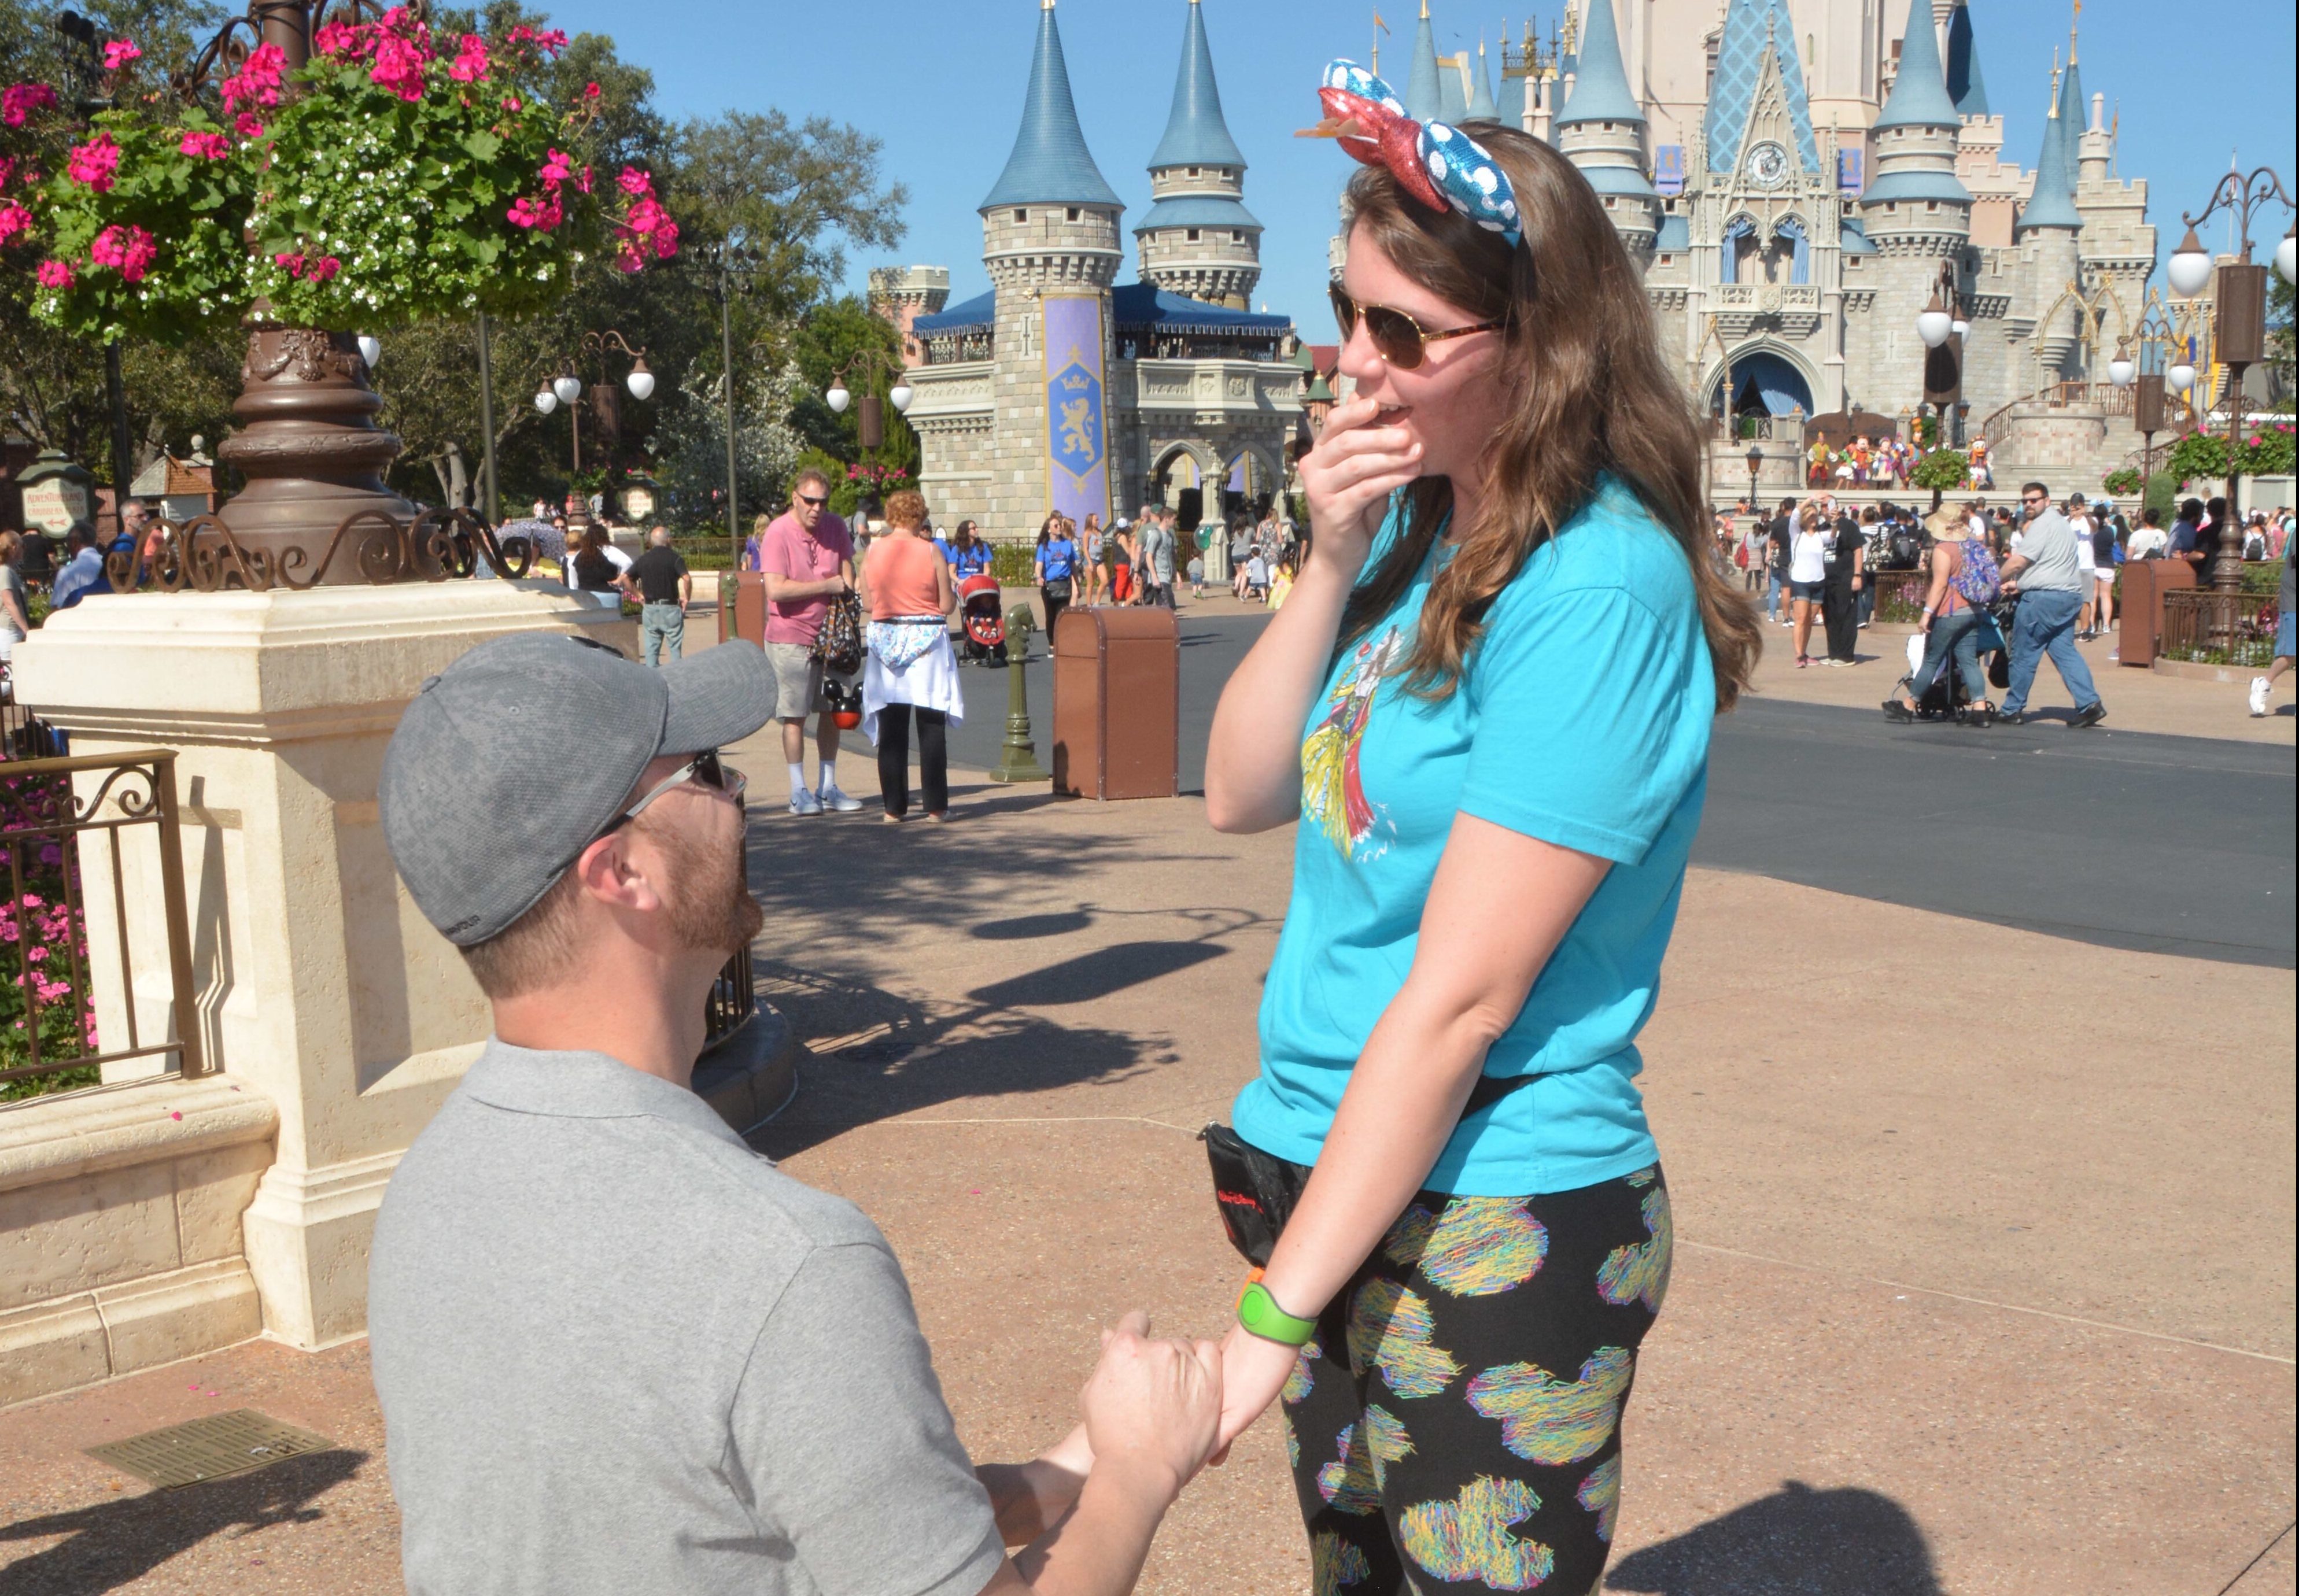 Disney PhotoPass Photographers Help This Groom to Be Create a Magical Proposal